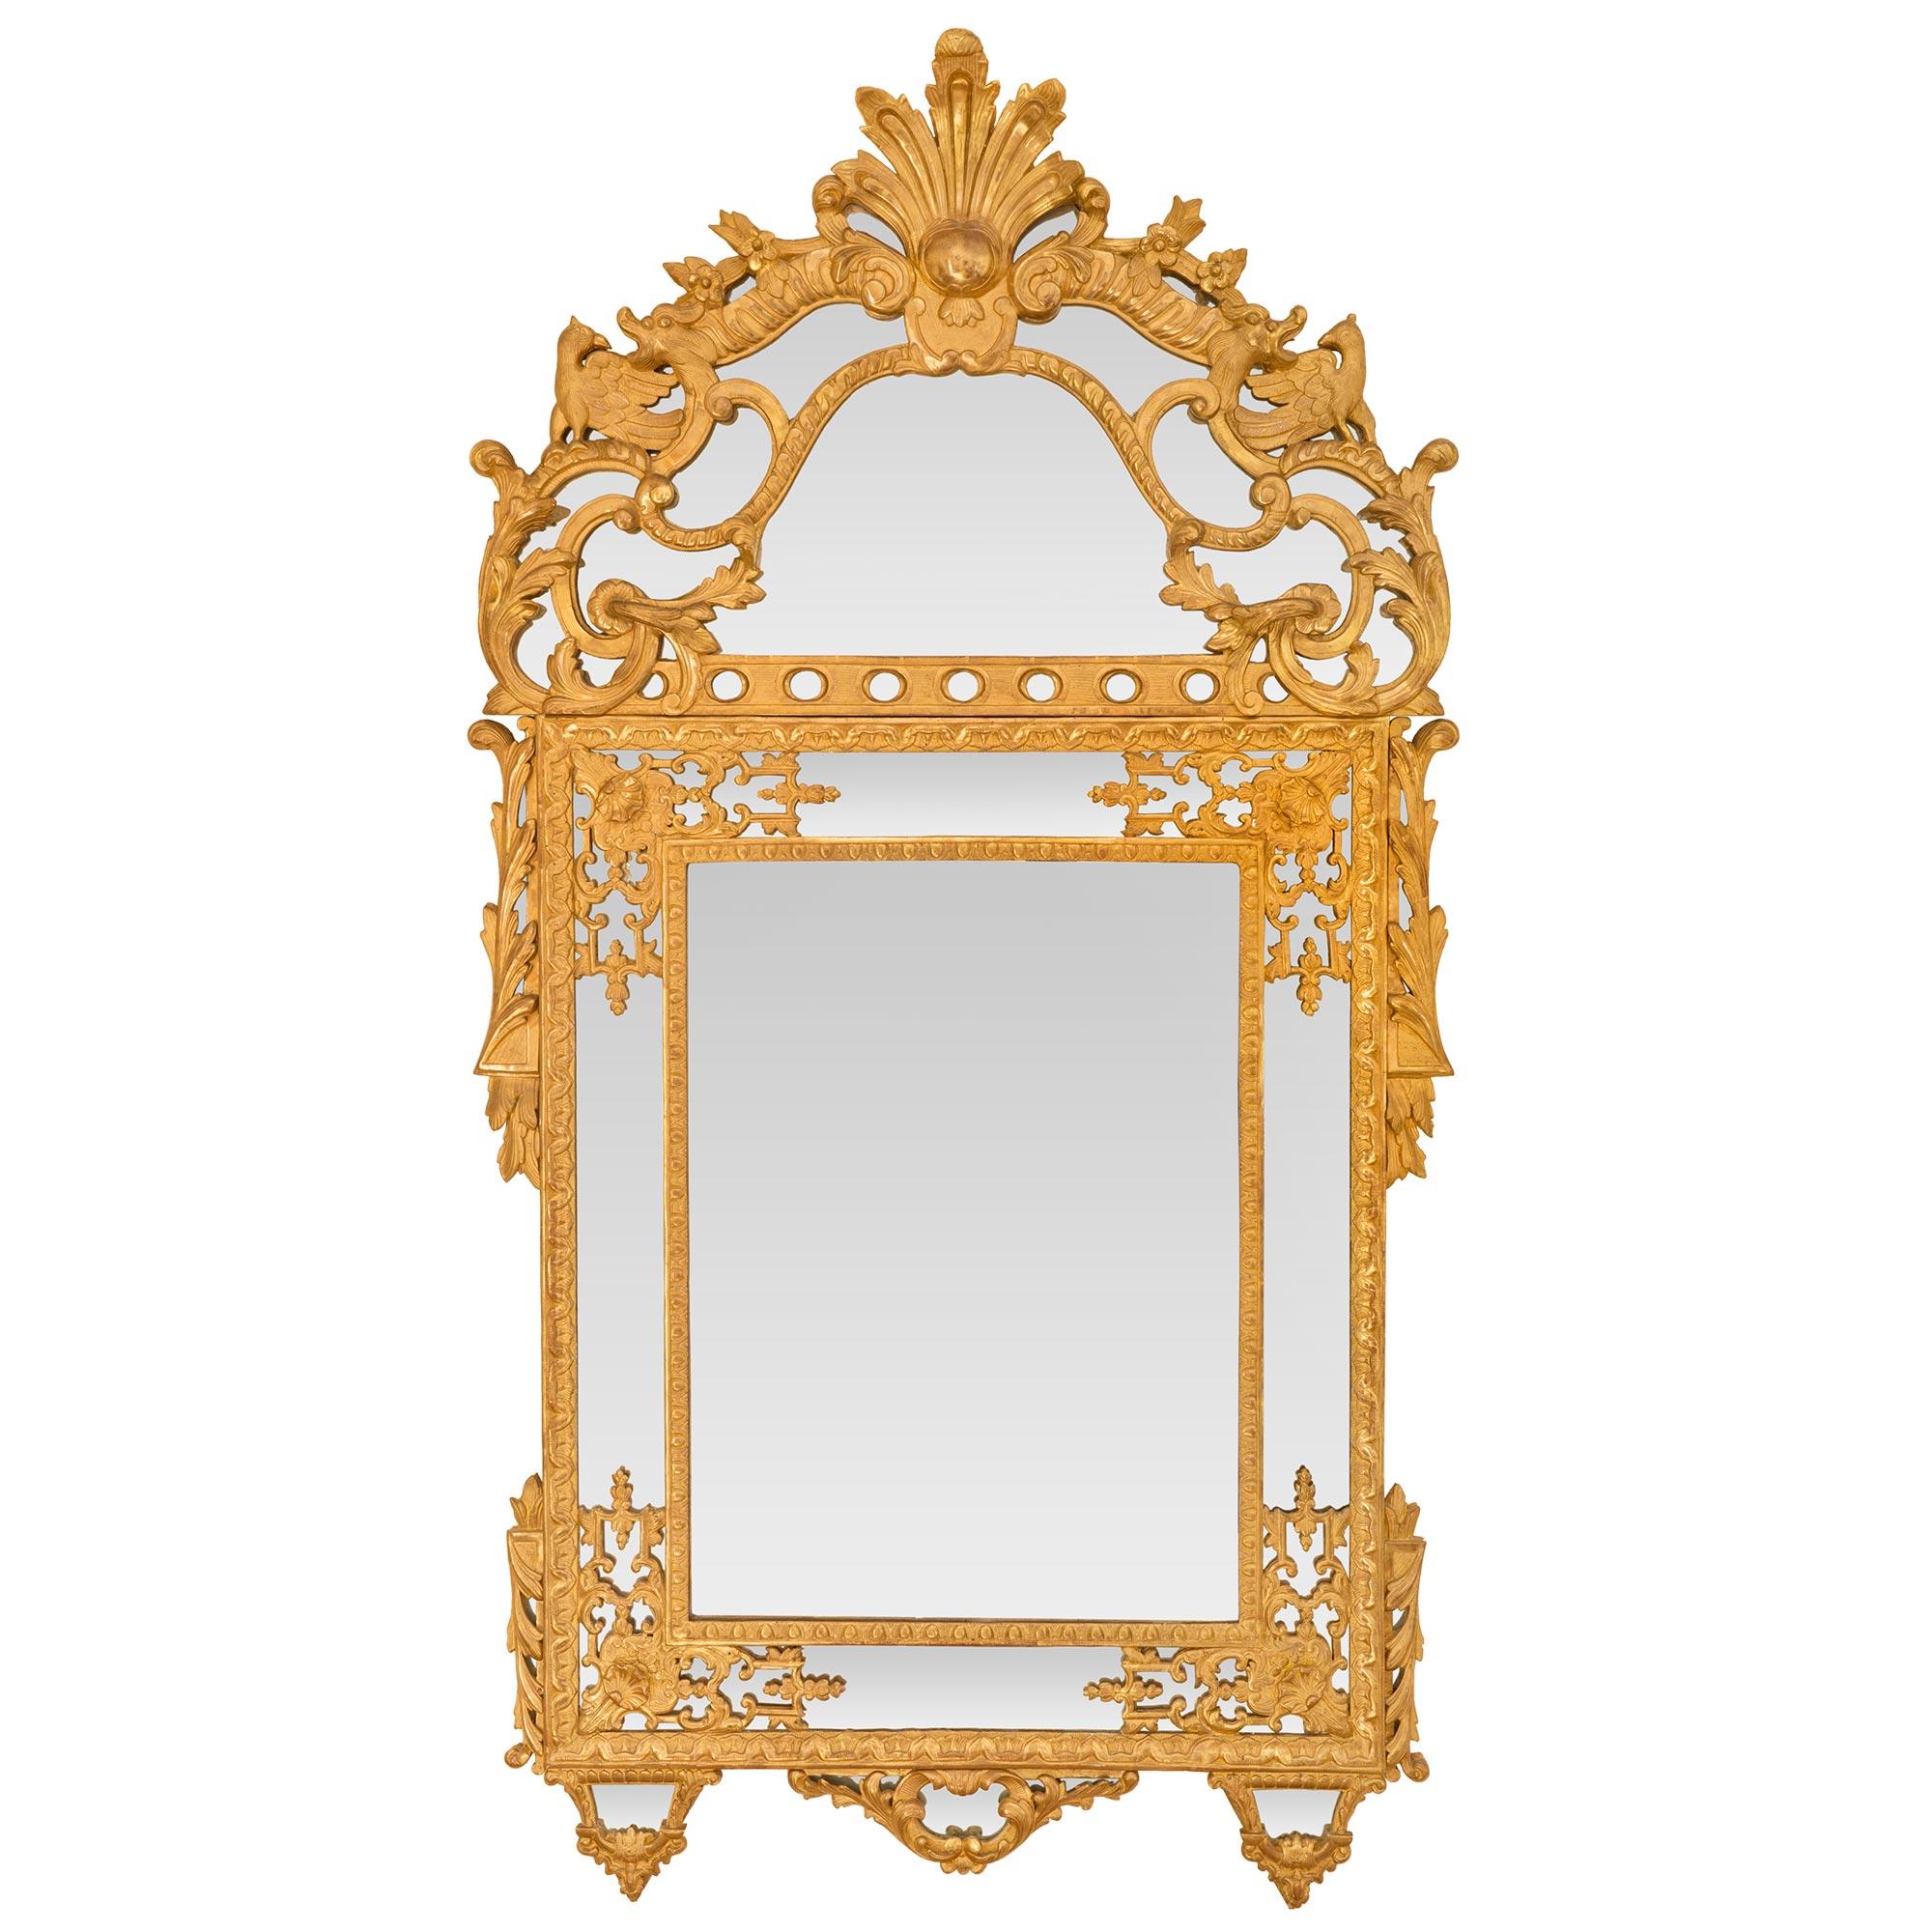 An impressive and very high quality French 19th century Régence st. double framed giltwood mirror. The mirror retains all of its original mirror plates throughout with the central one framed within a fine mottled giltwood band with an elegant Les